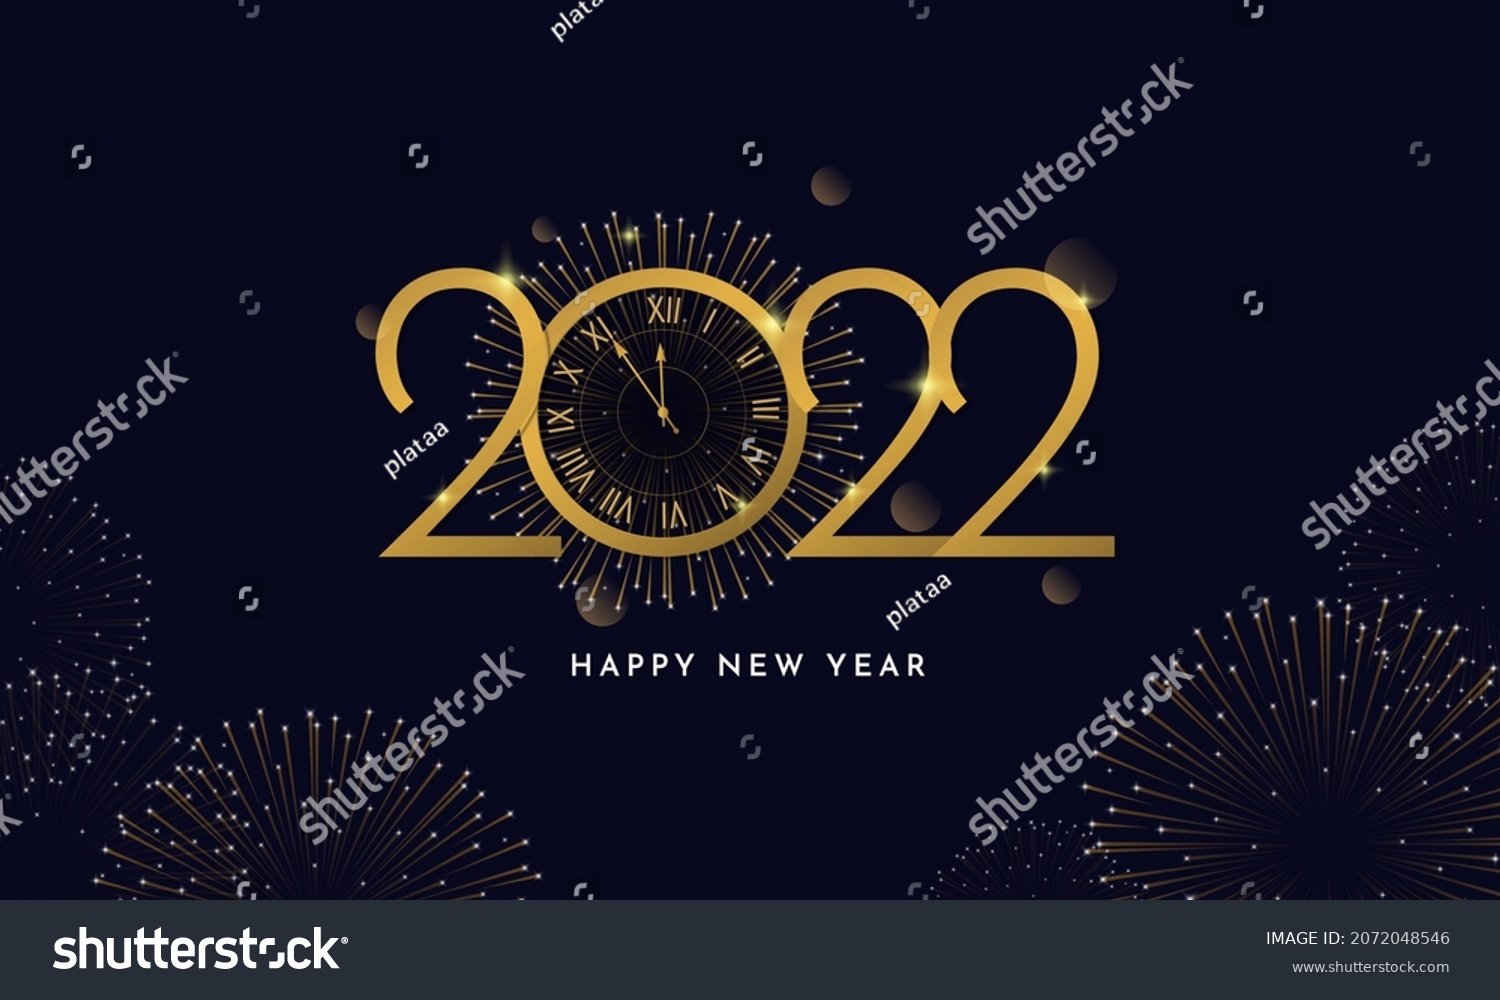 Happy New Year 2022 Poster. Golden Typography Line with Elegant Classic Watch and Fireworks Background Vector Illustration Design #2072048546